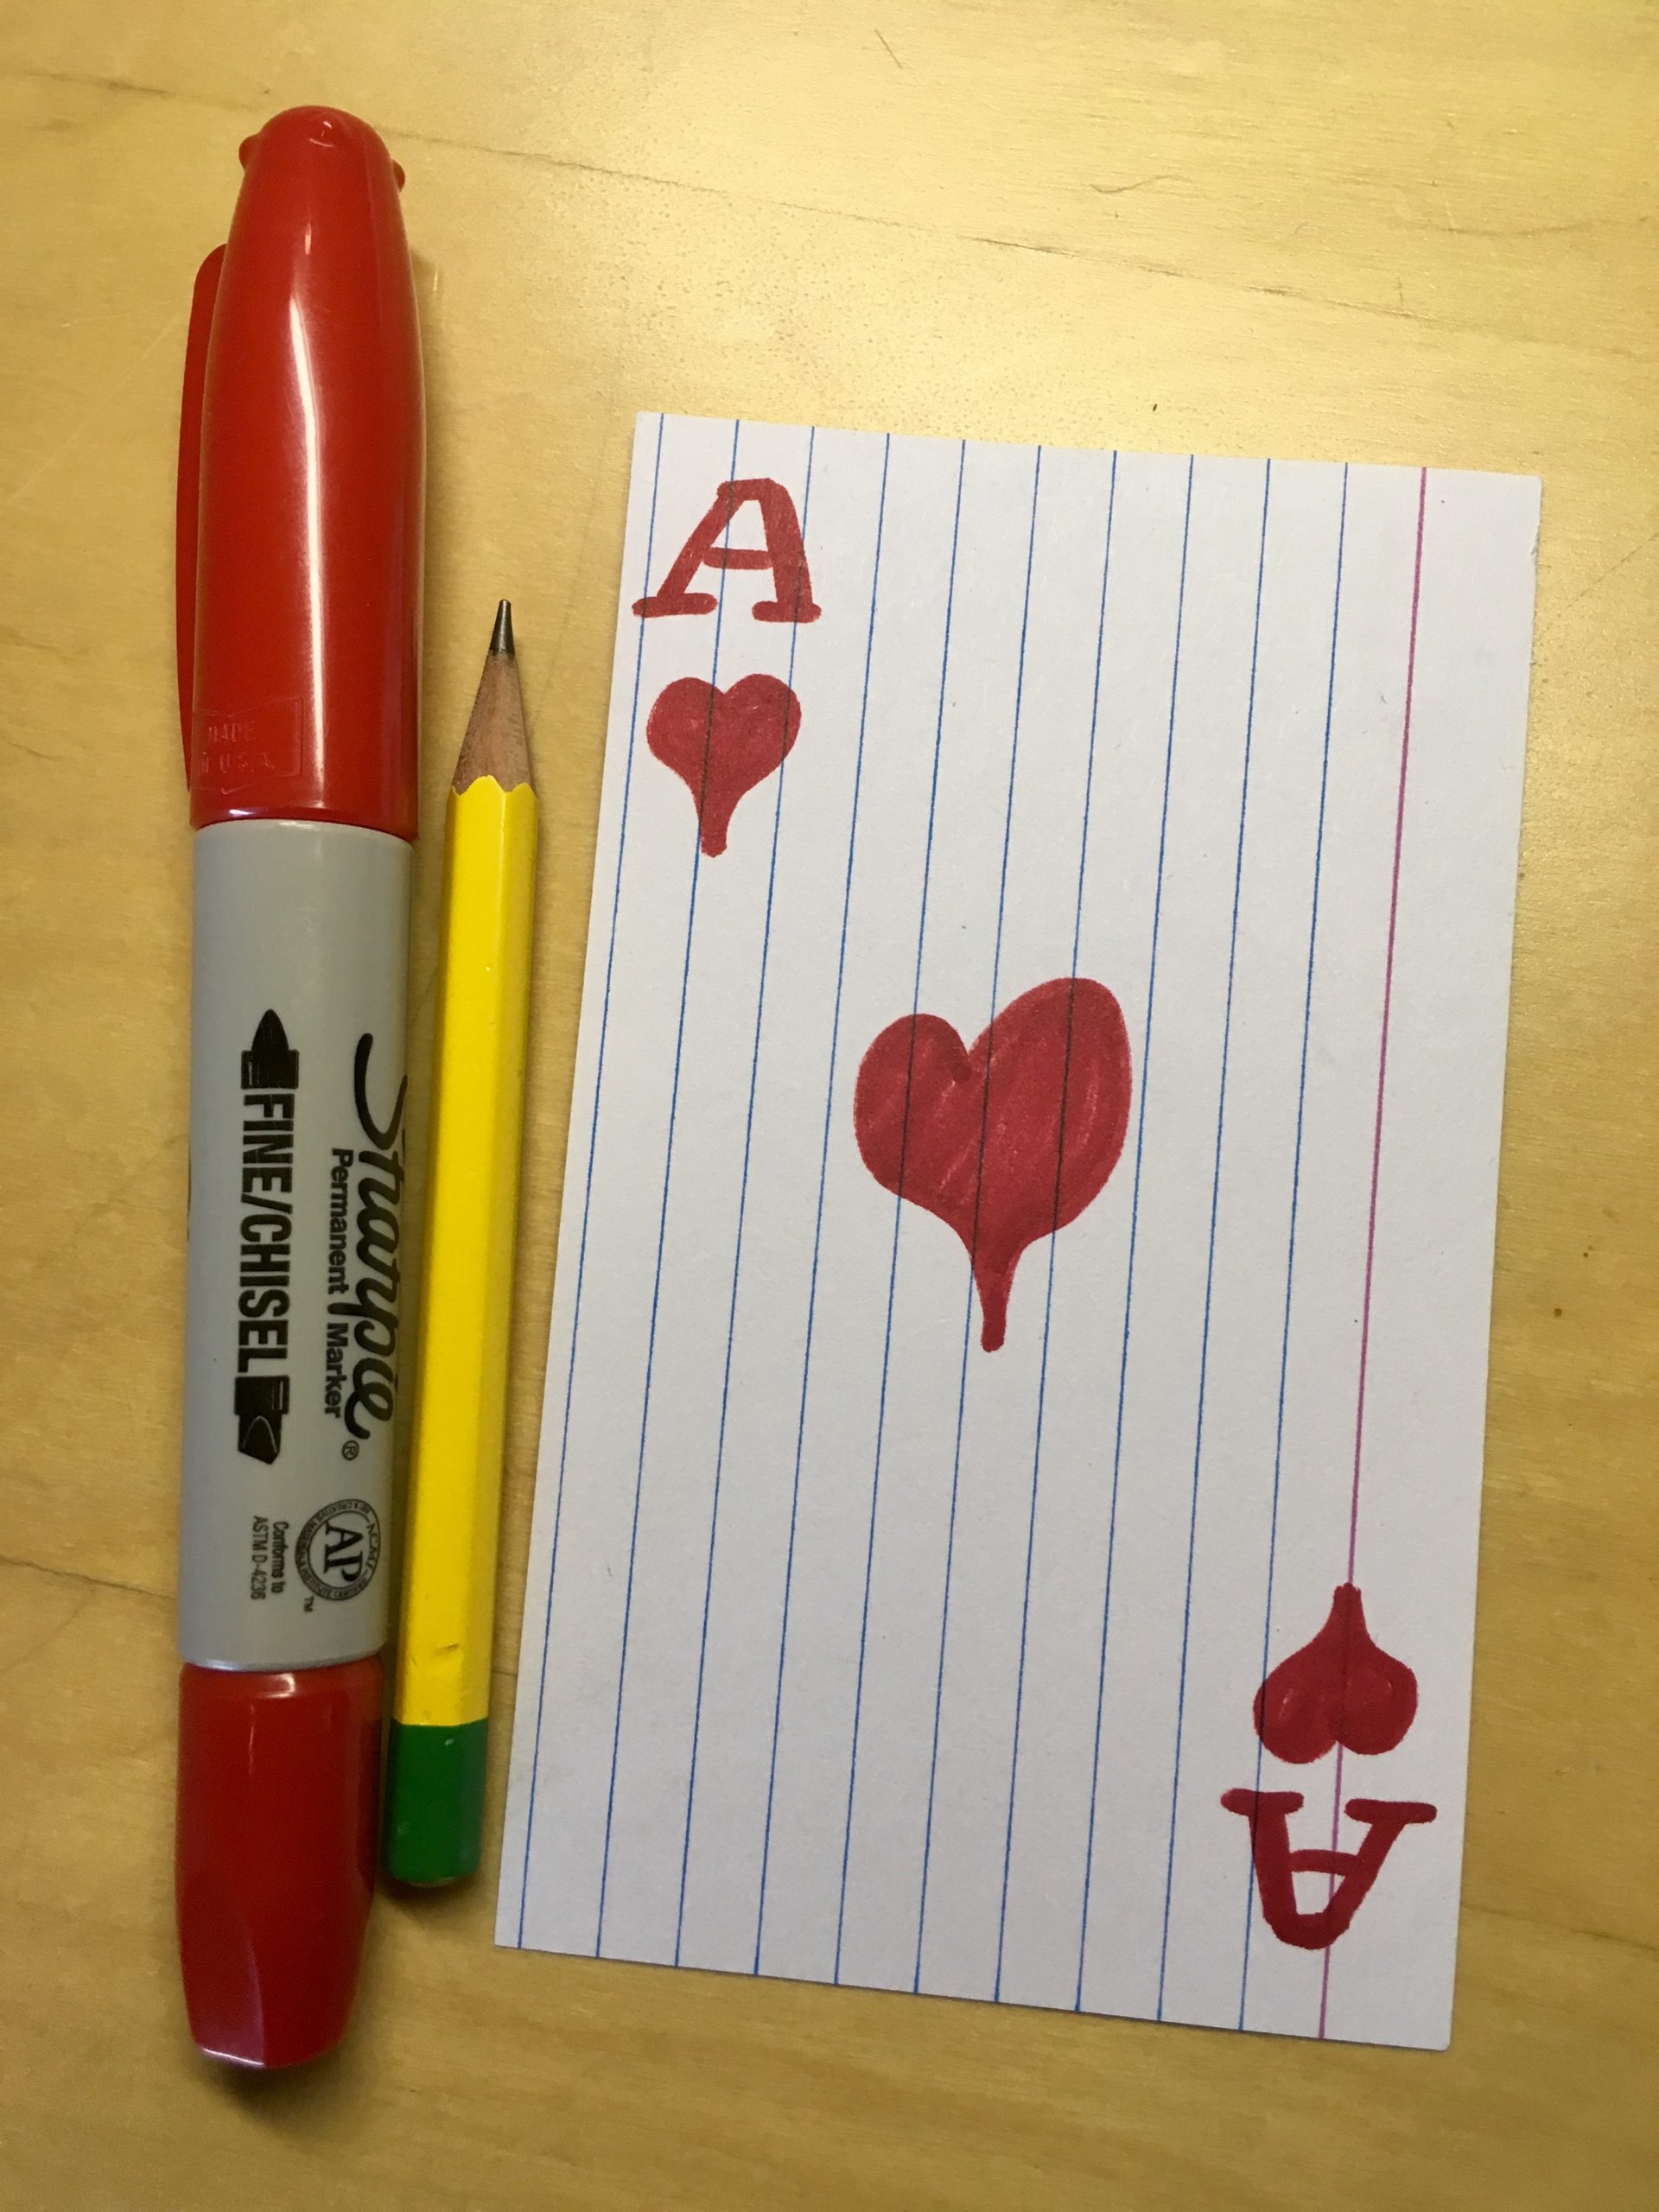 An index card illustrated to look like the Ace of Hearts next to a red marker and pencil.